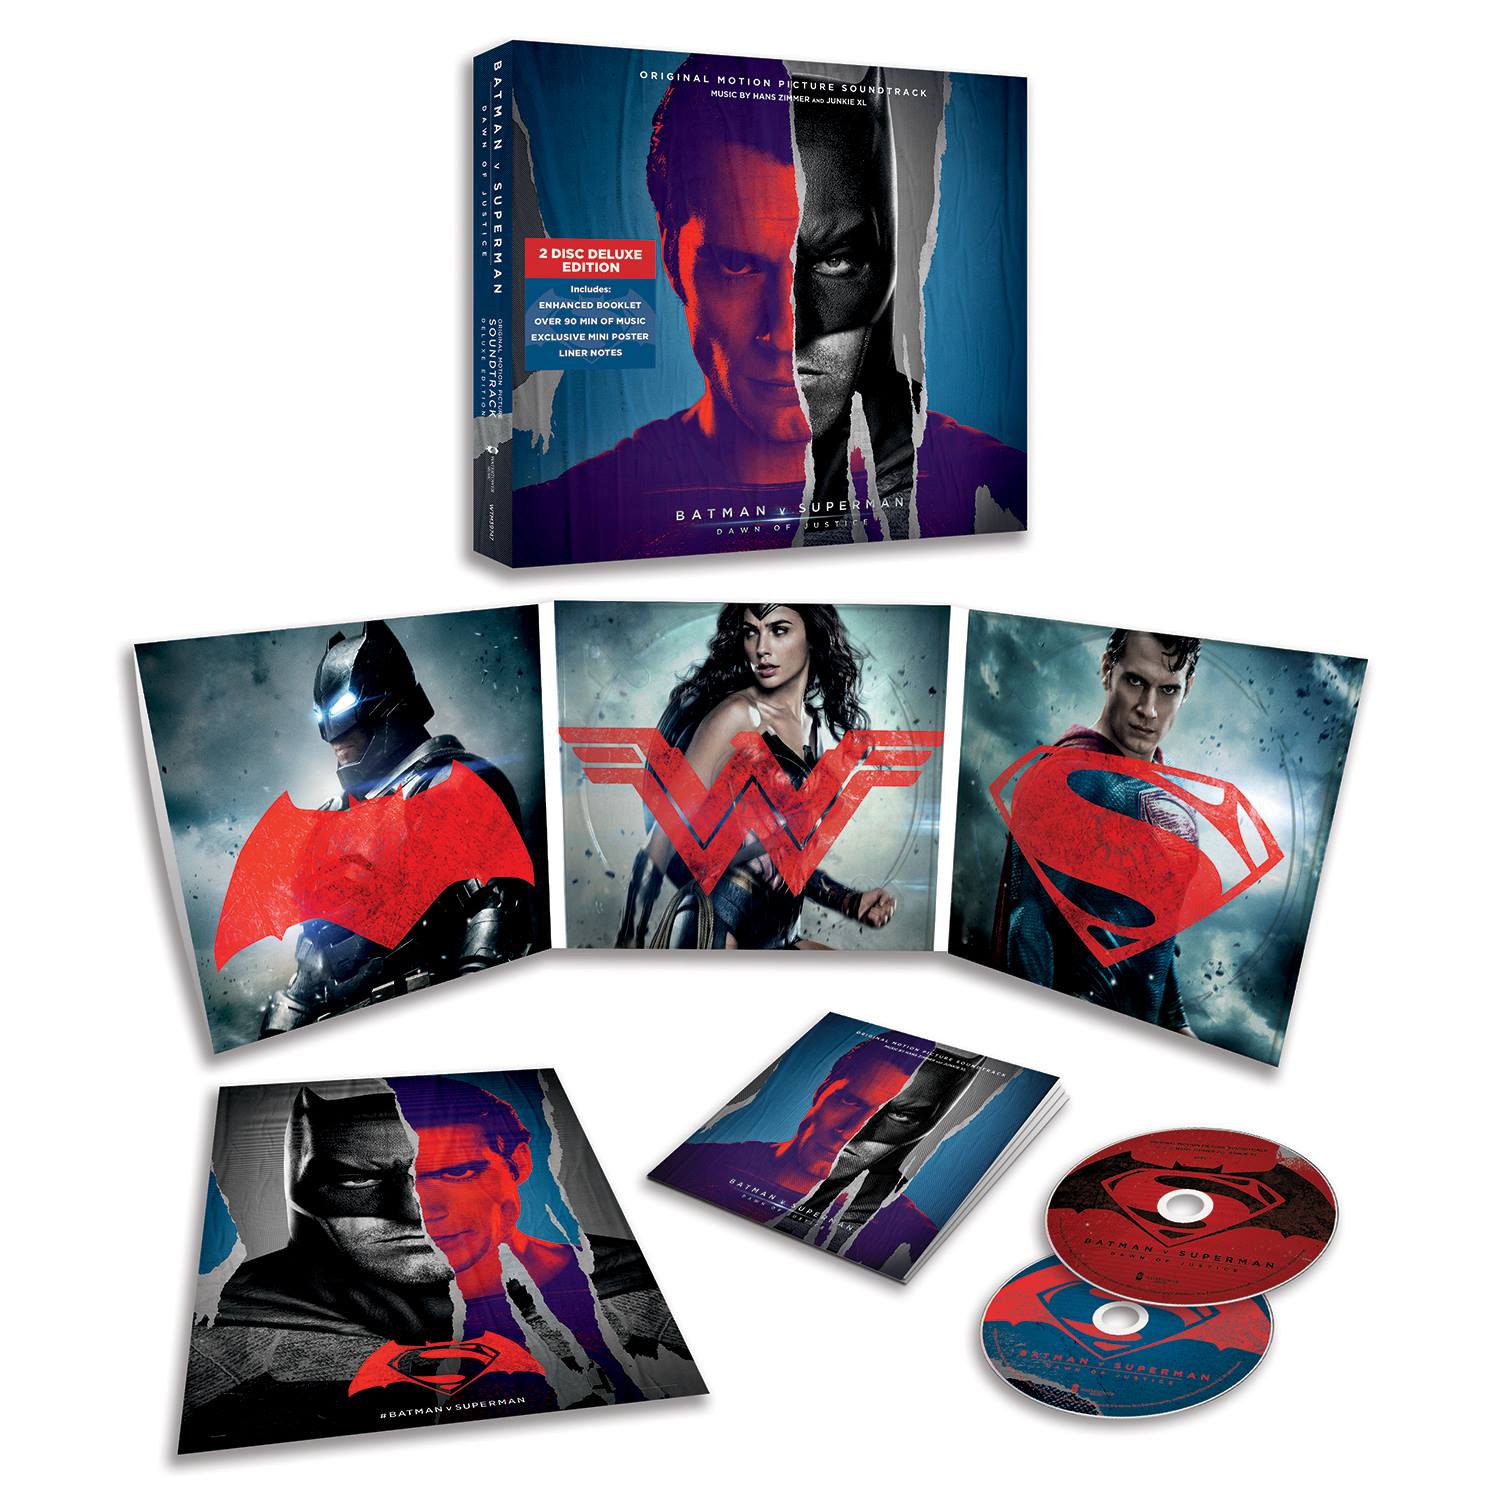 Batman v Superman' soundtrack coming March 18, but you can preview it right  here | Batman News